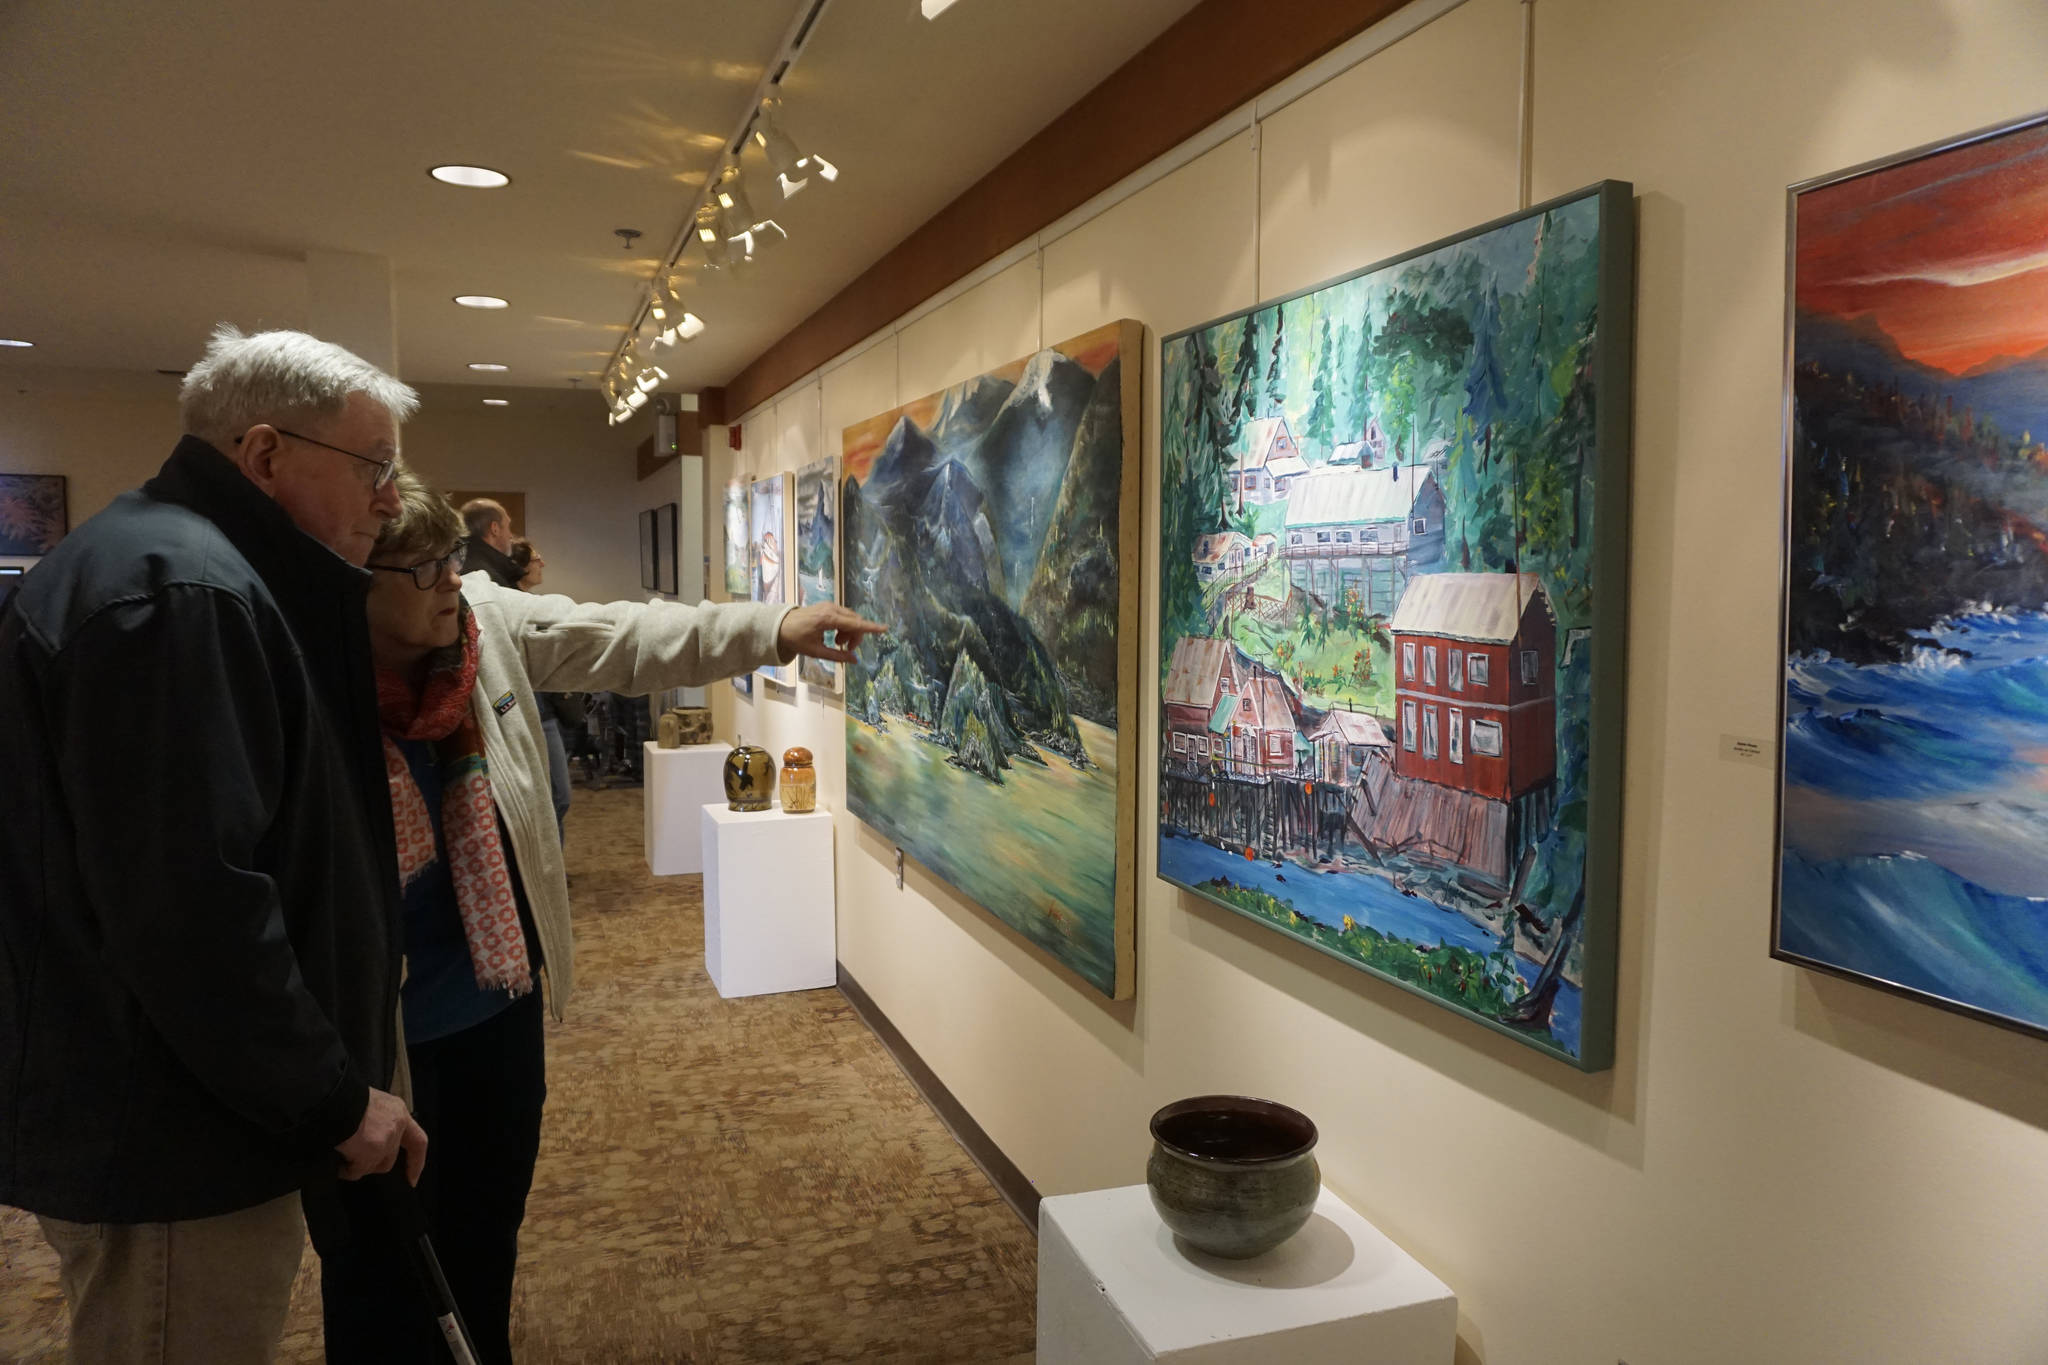 Franco and Caroline Venuti look at John Fenske’s paintings at the First Friday, April 5, 2019, opening for his retrospective showing at Kachemak Bay Campus in Homer, Alaska. (Photo by Michael Armstrong/Homer News)